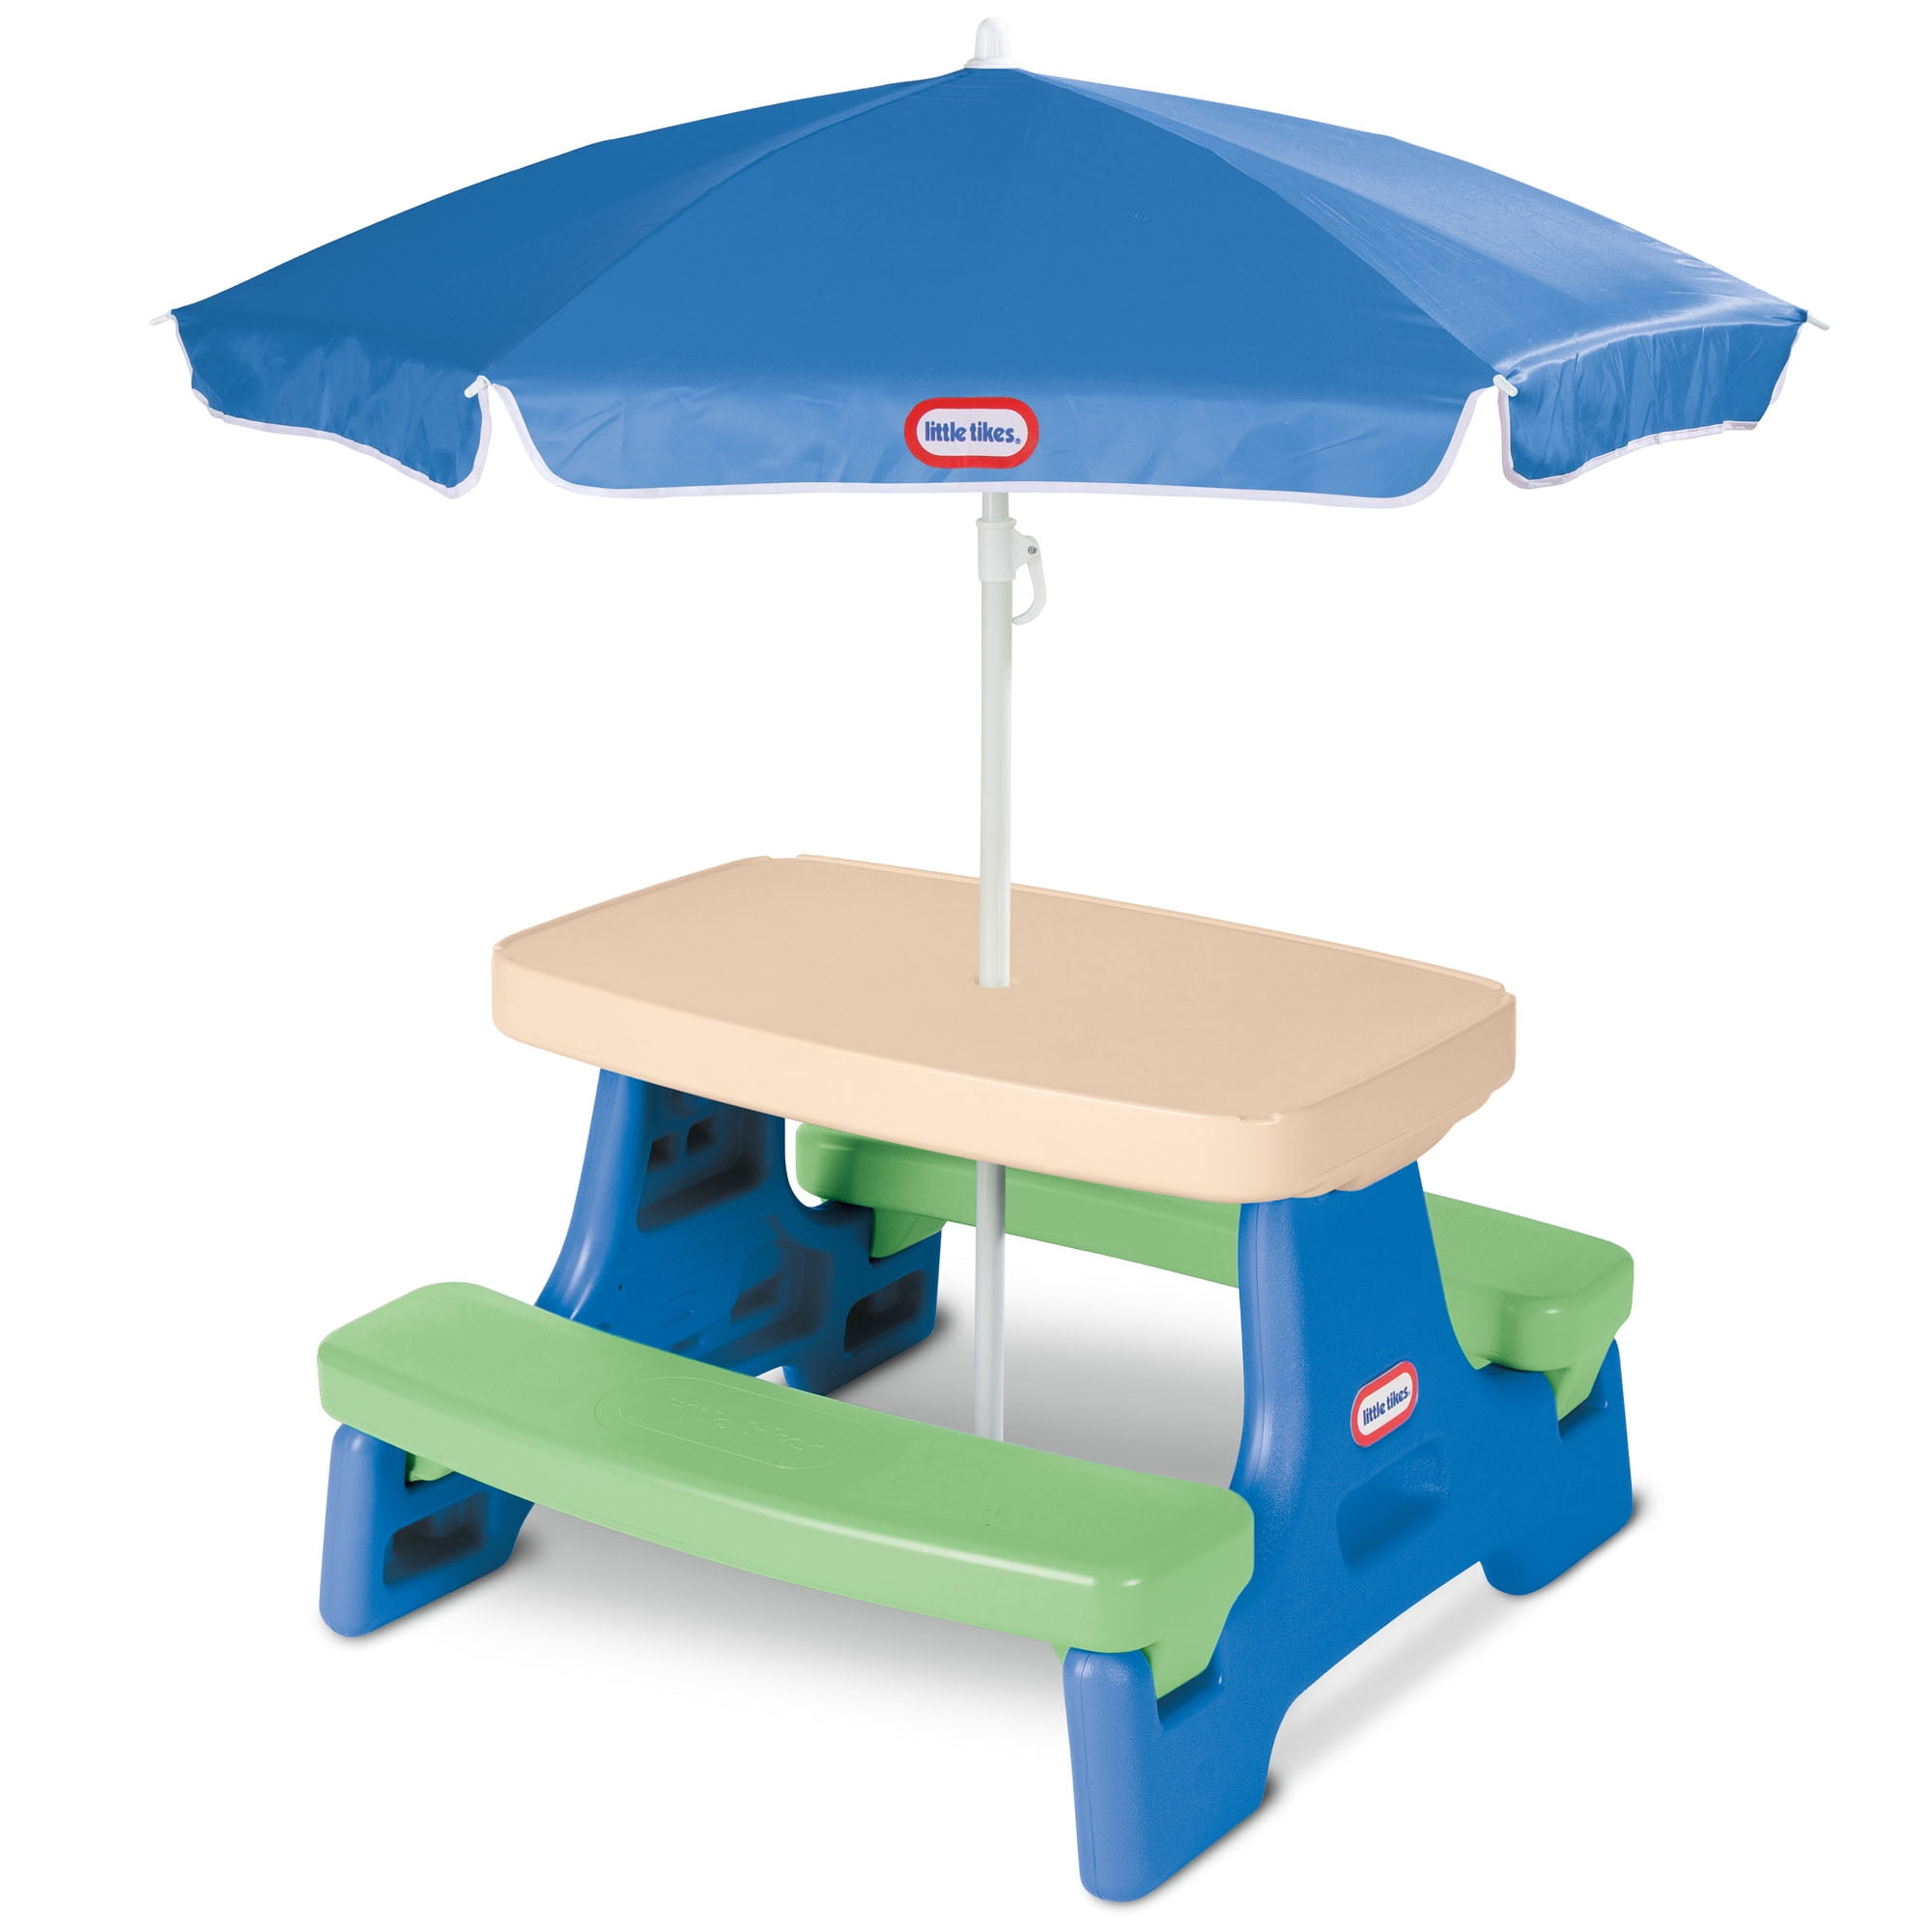 Little Tikes Easy Store Jr. Picnic Table with Umbrella, Blue & Green - Play Table with Umbrella, for Kids - 1